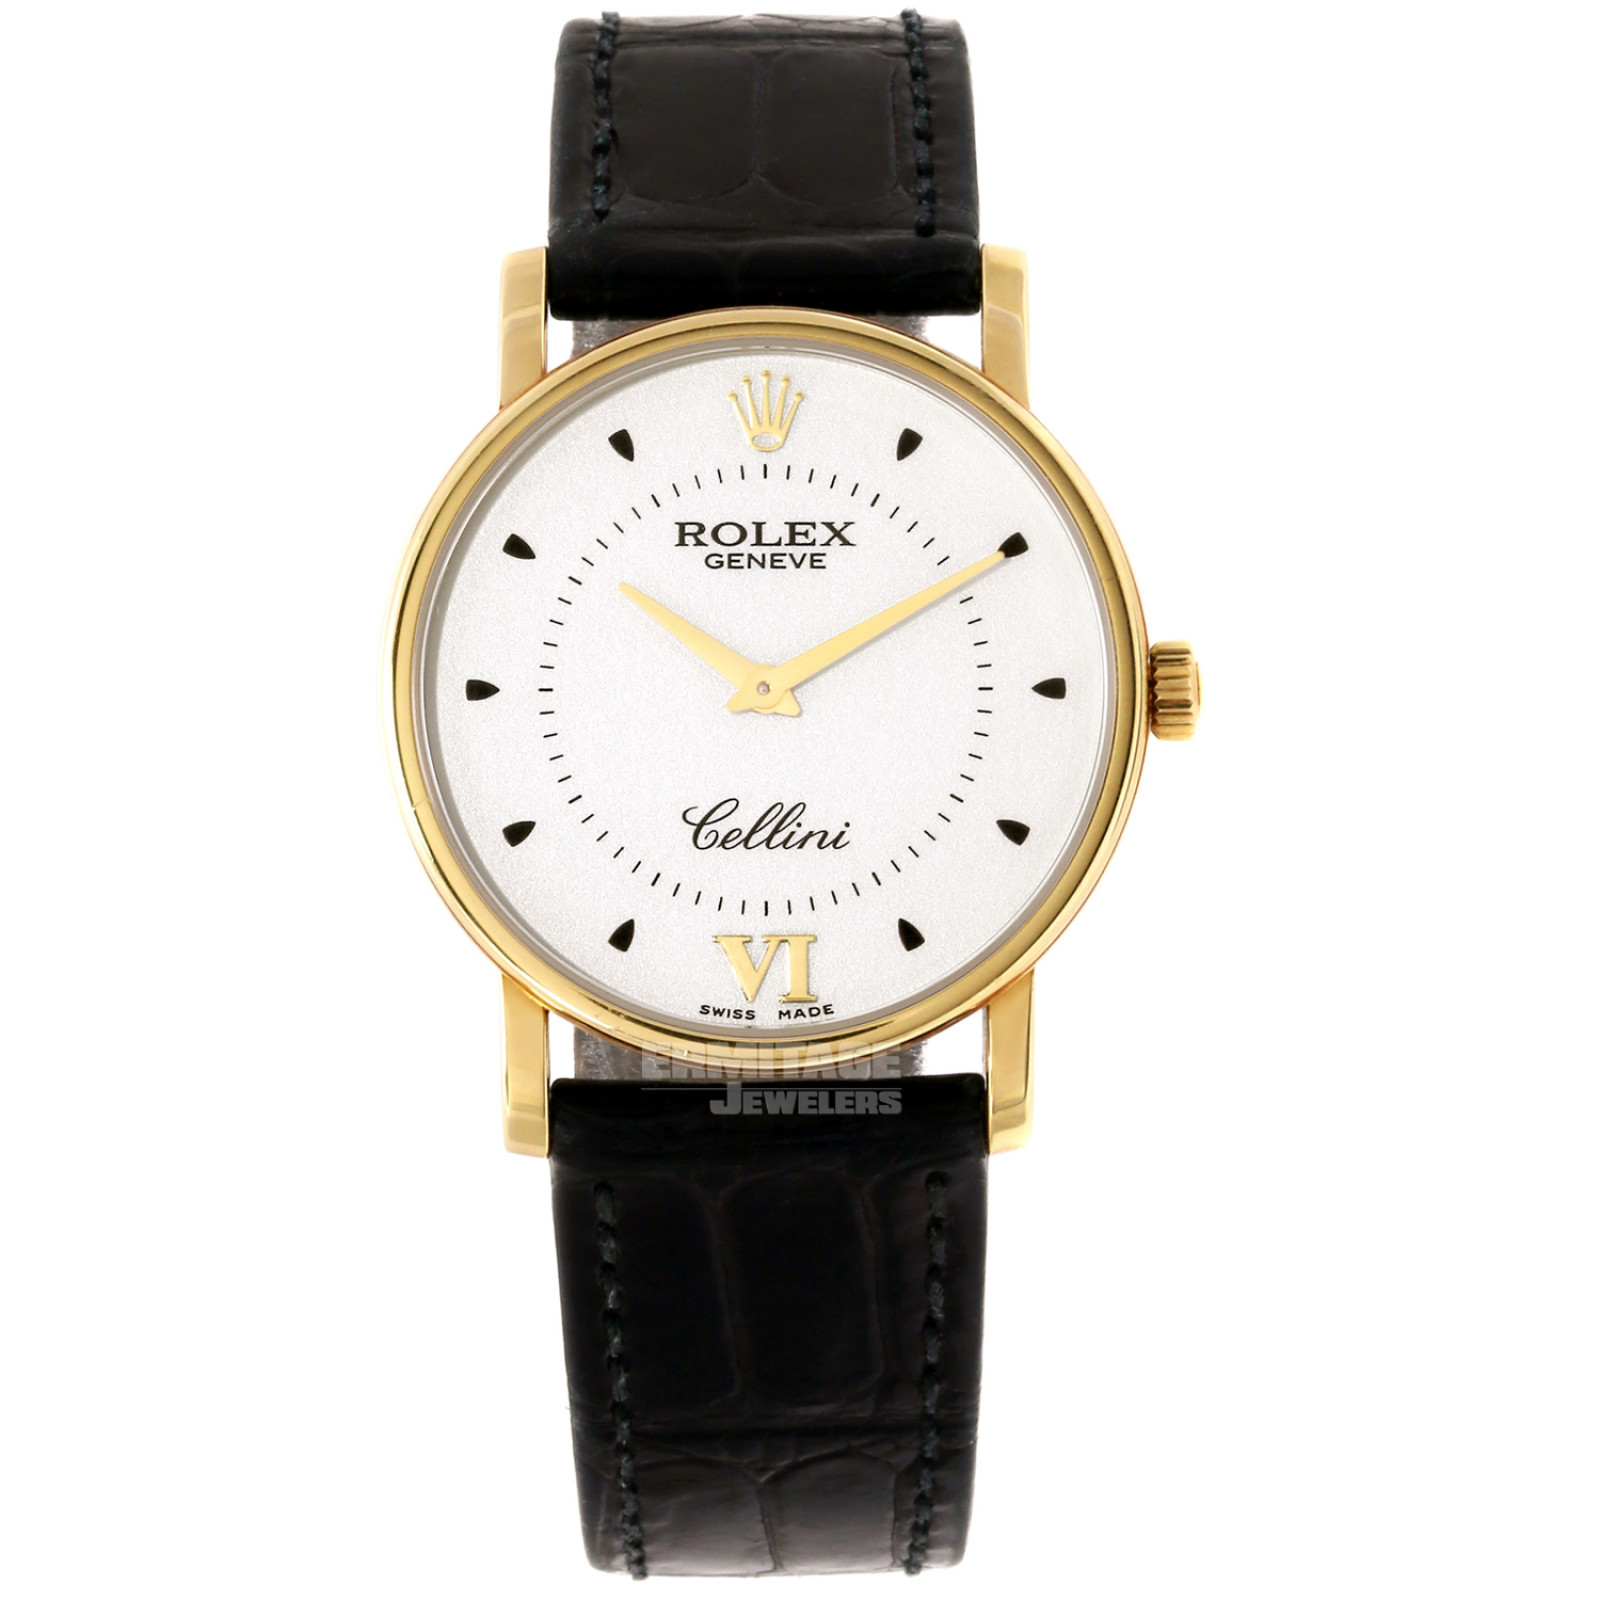 Sell Your Rolex Cellini 5115